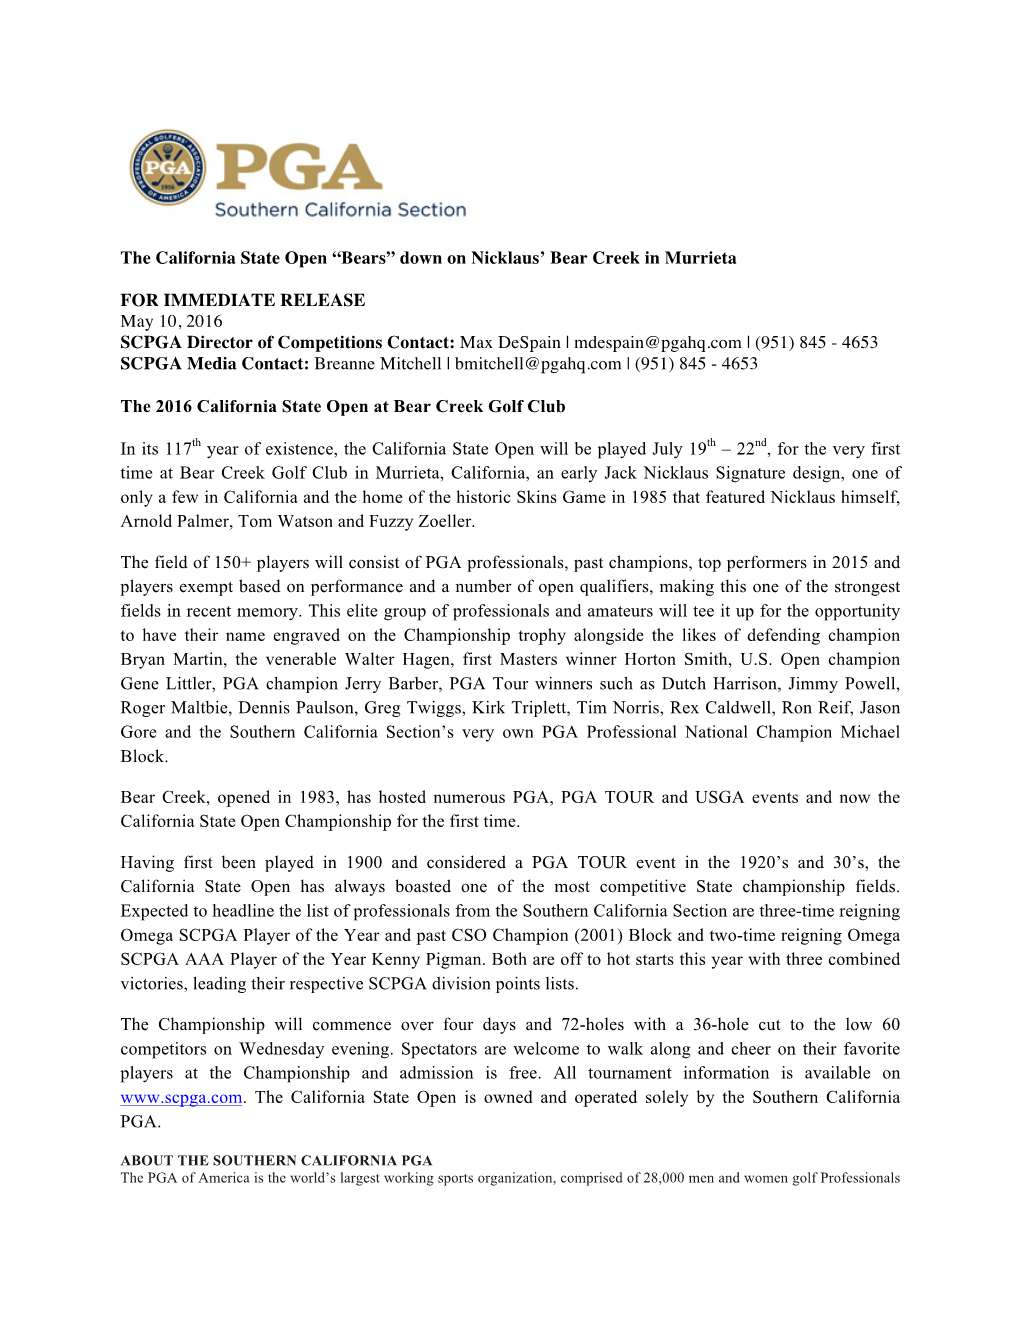 The California State Open “Bears” Down on Nicklaus' Bear Creek in Murrieta for IMMEDIATE RELEASE May 10, 2016 SCPGA Direc